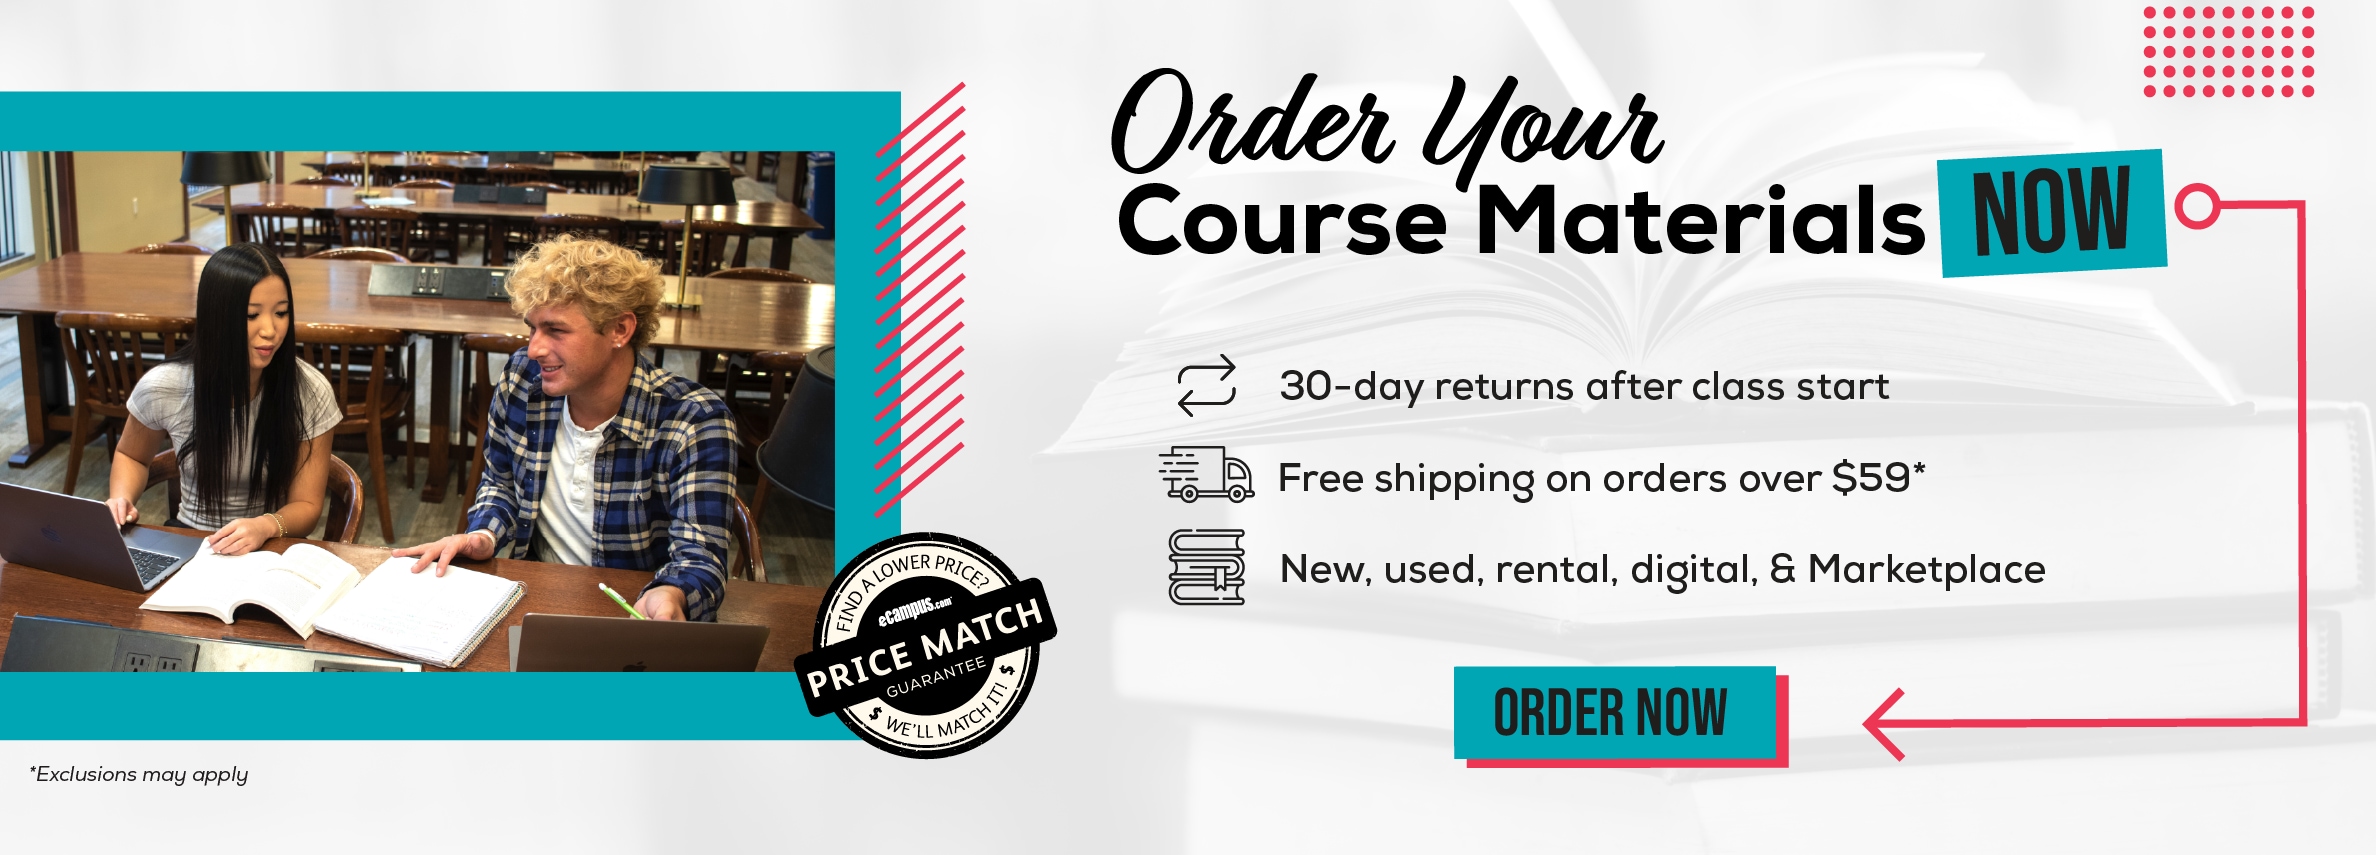 Order Your Course Materials Now. 30-day returns after class start. Free shipping on orders over $59*. New, used, rental, digital, & Marketplace. Order now. *Exclusions may apply.